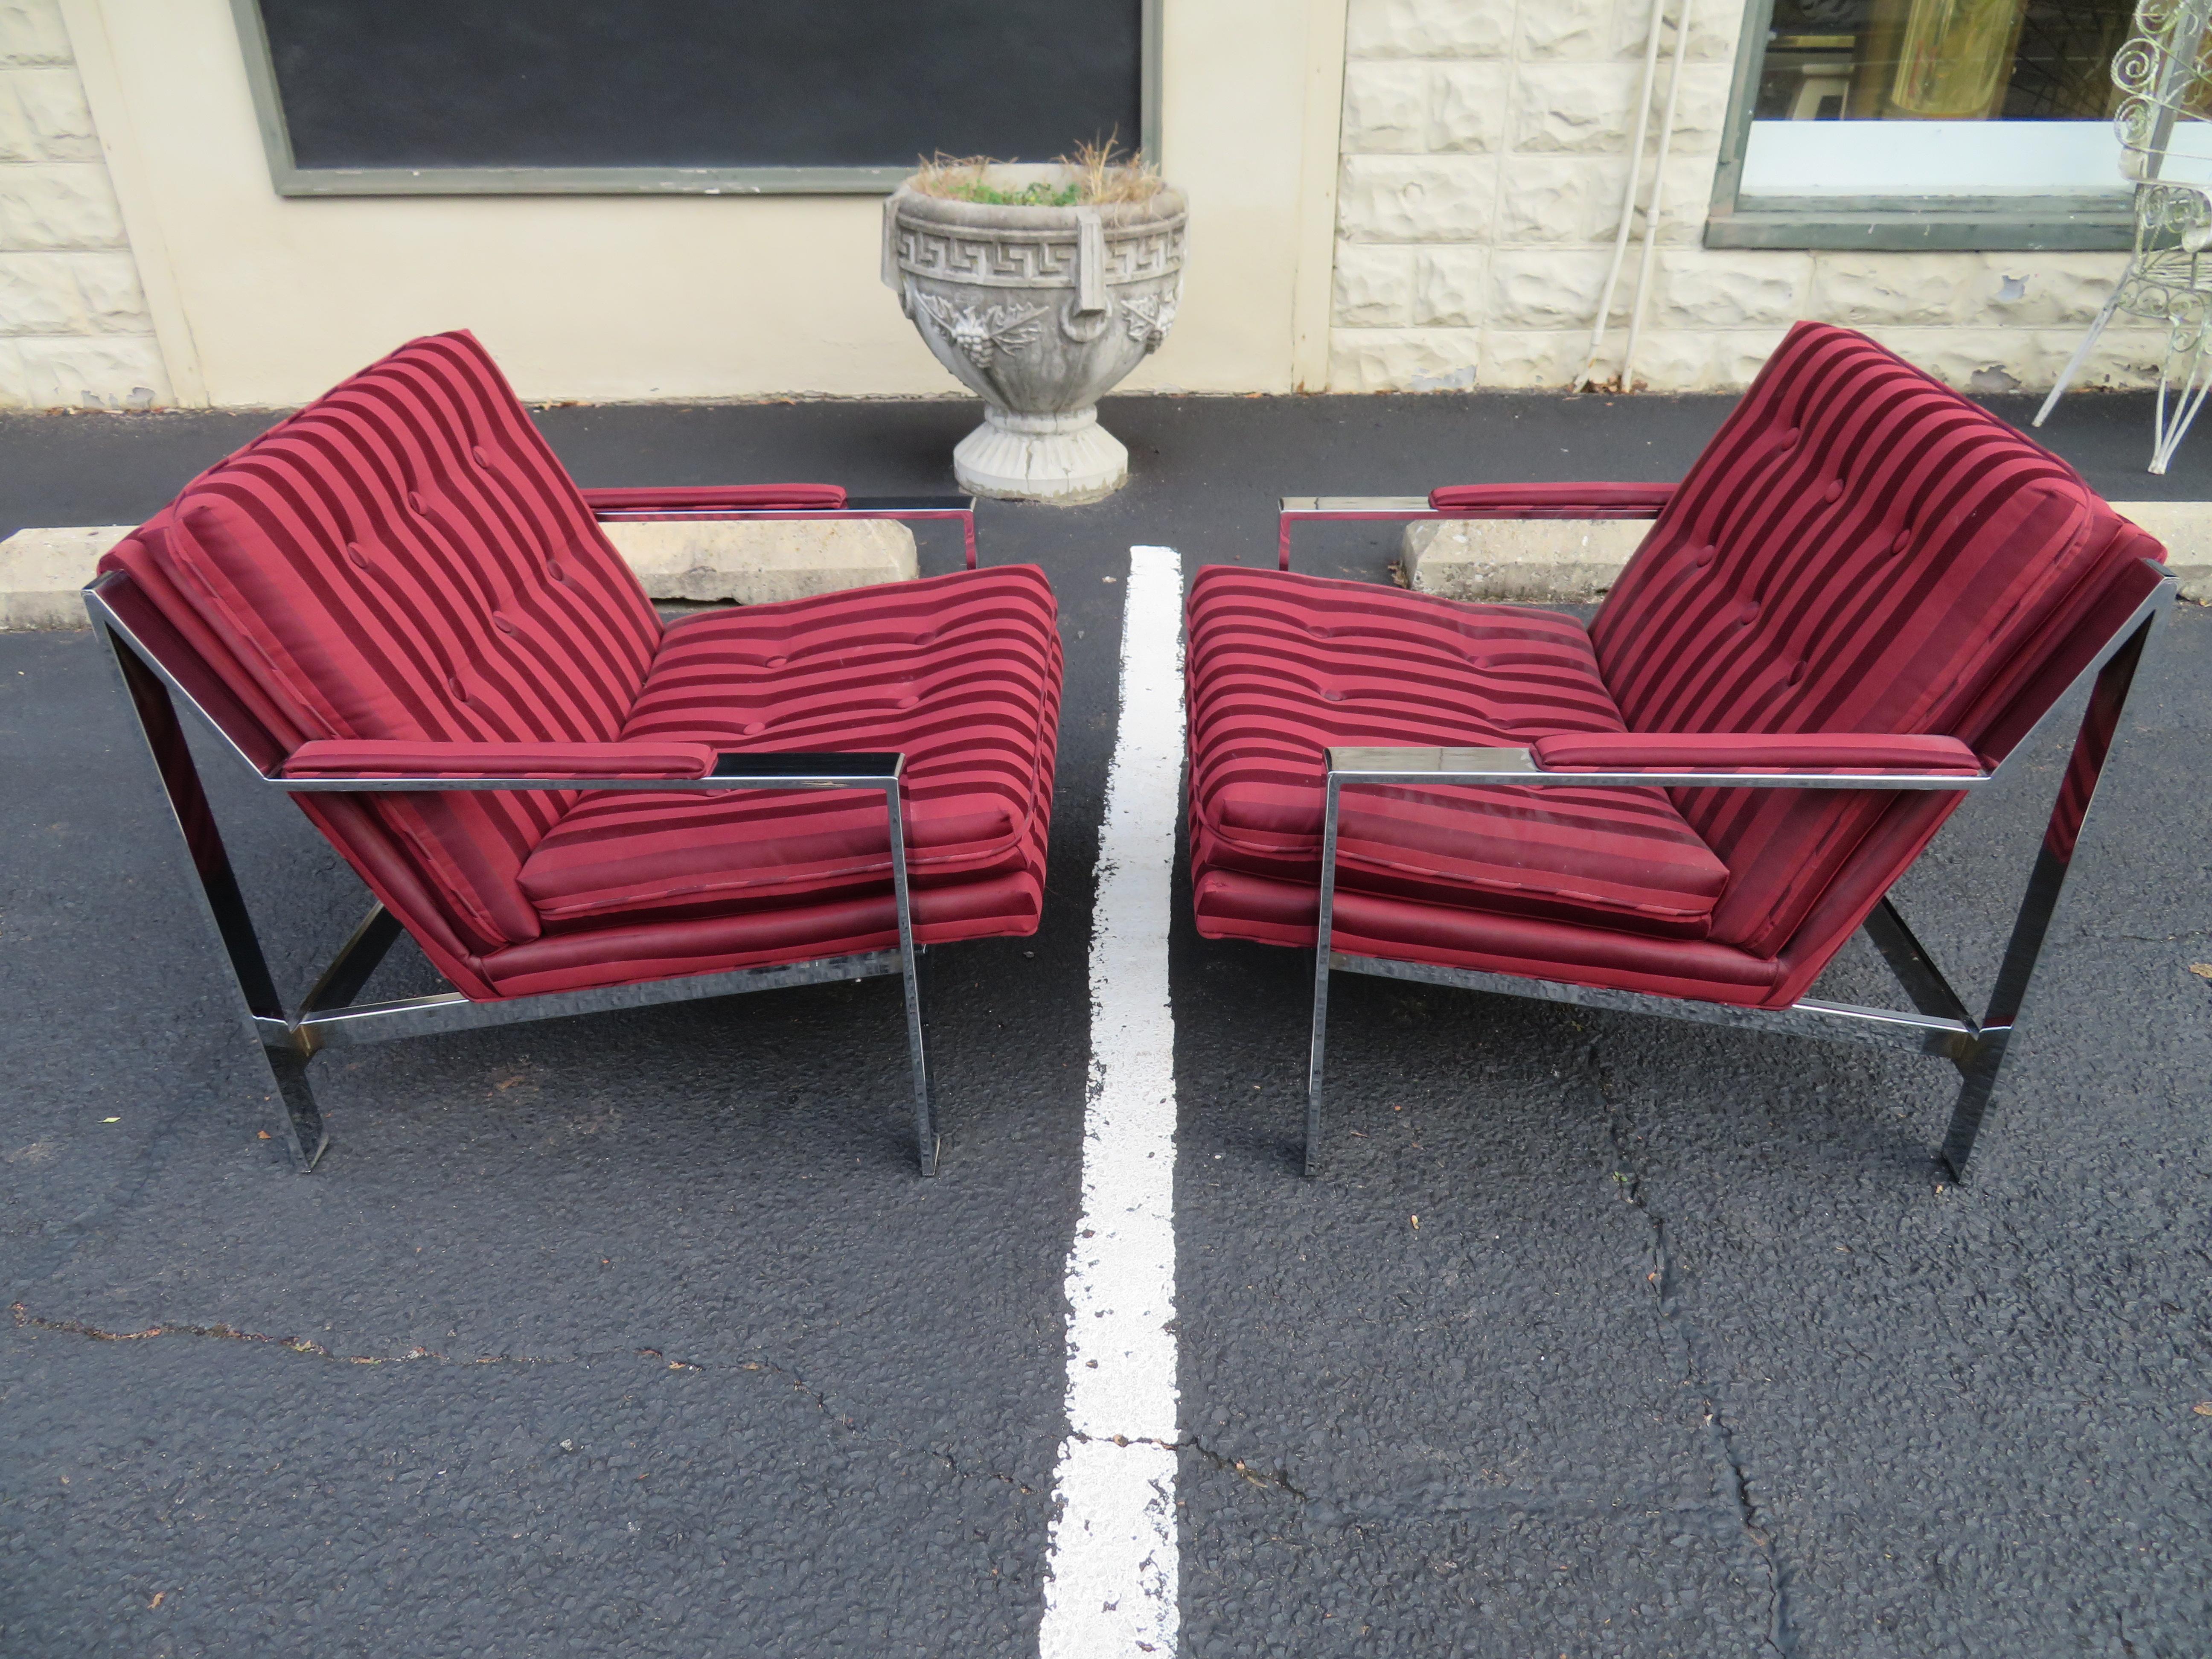 Pair of Milo Baughman Style Chrome Flat Bar Lounge Chairs, Mid-Century Modern For Sale 8